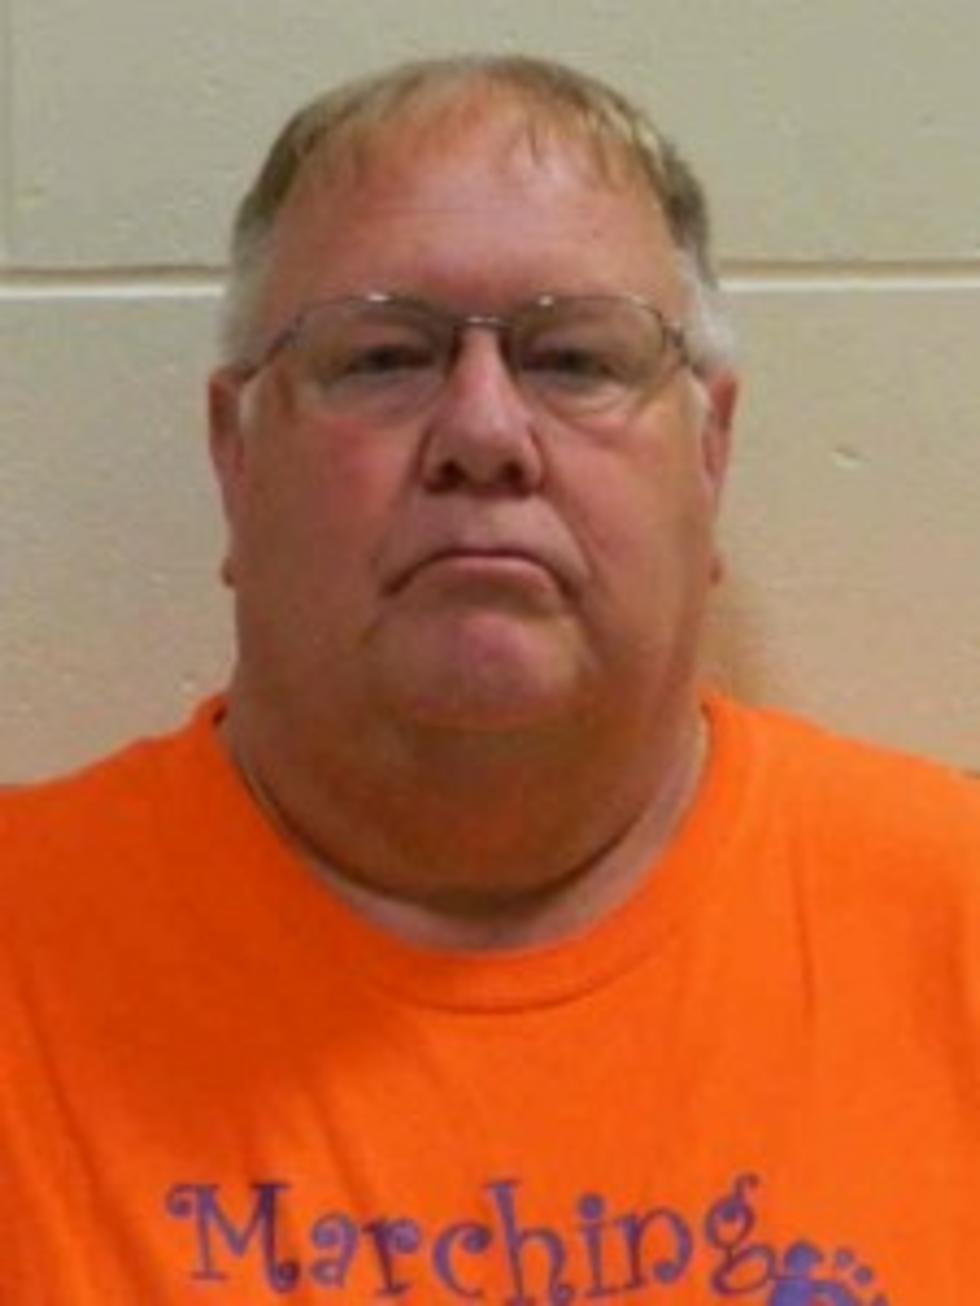 Fairbank Man Pleads, Sentenced in Indecent Contact Case